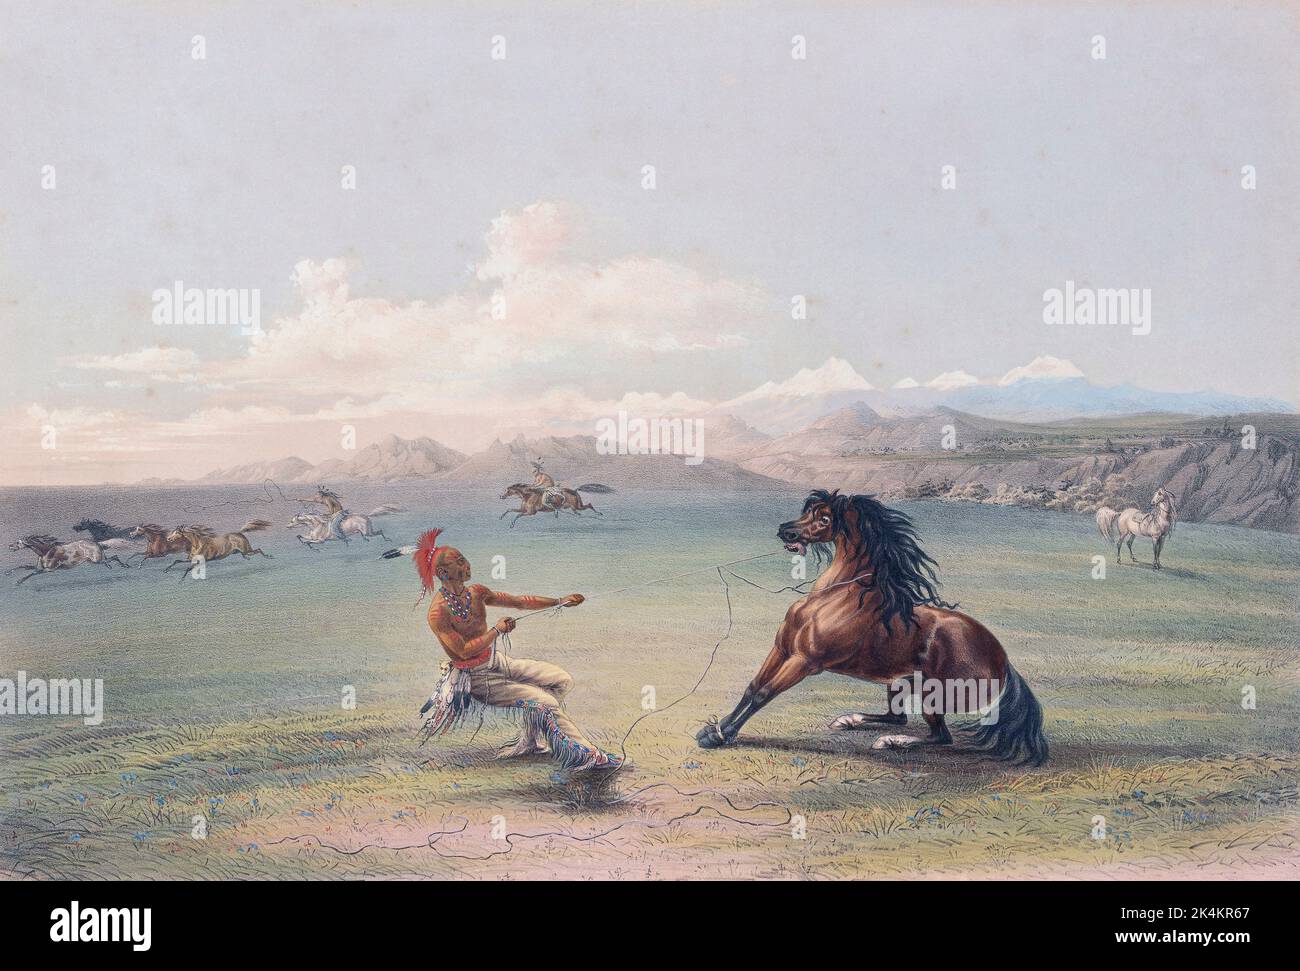 Catching the Wild Horse. From Catlin's North American Indian Portfolio, published in London, 1844 by the artist, American adventurer George Catlin, 1796 - 1872.  During many journeys Catlin recorded with pen and brush the customs and life-styles of Native American tribes. Stock Photo